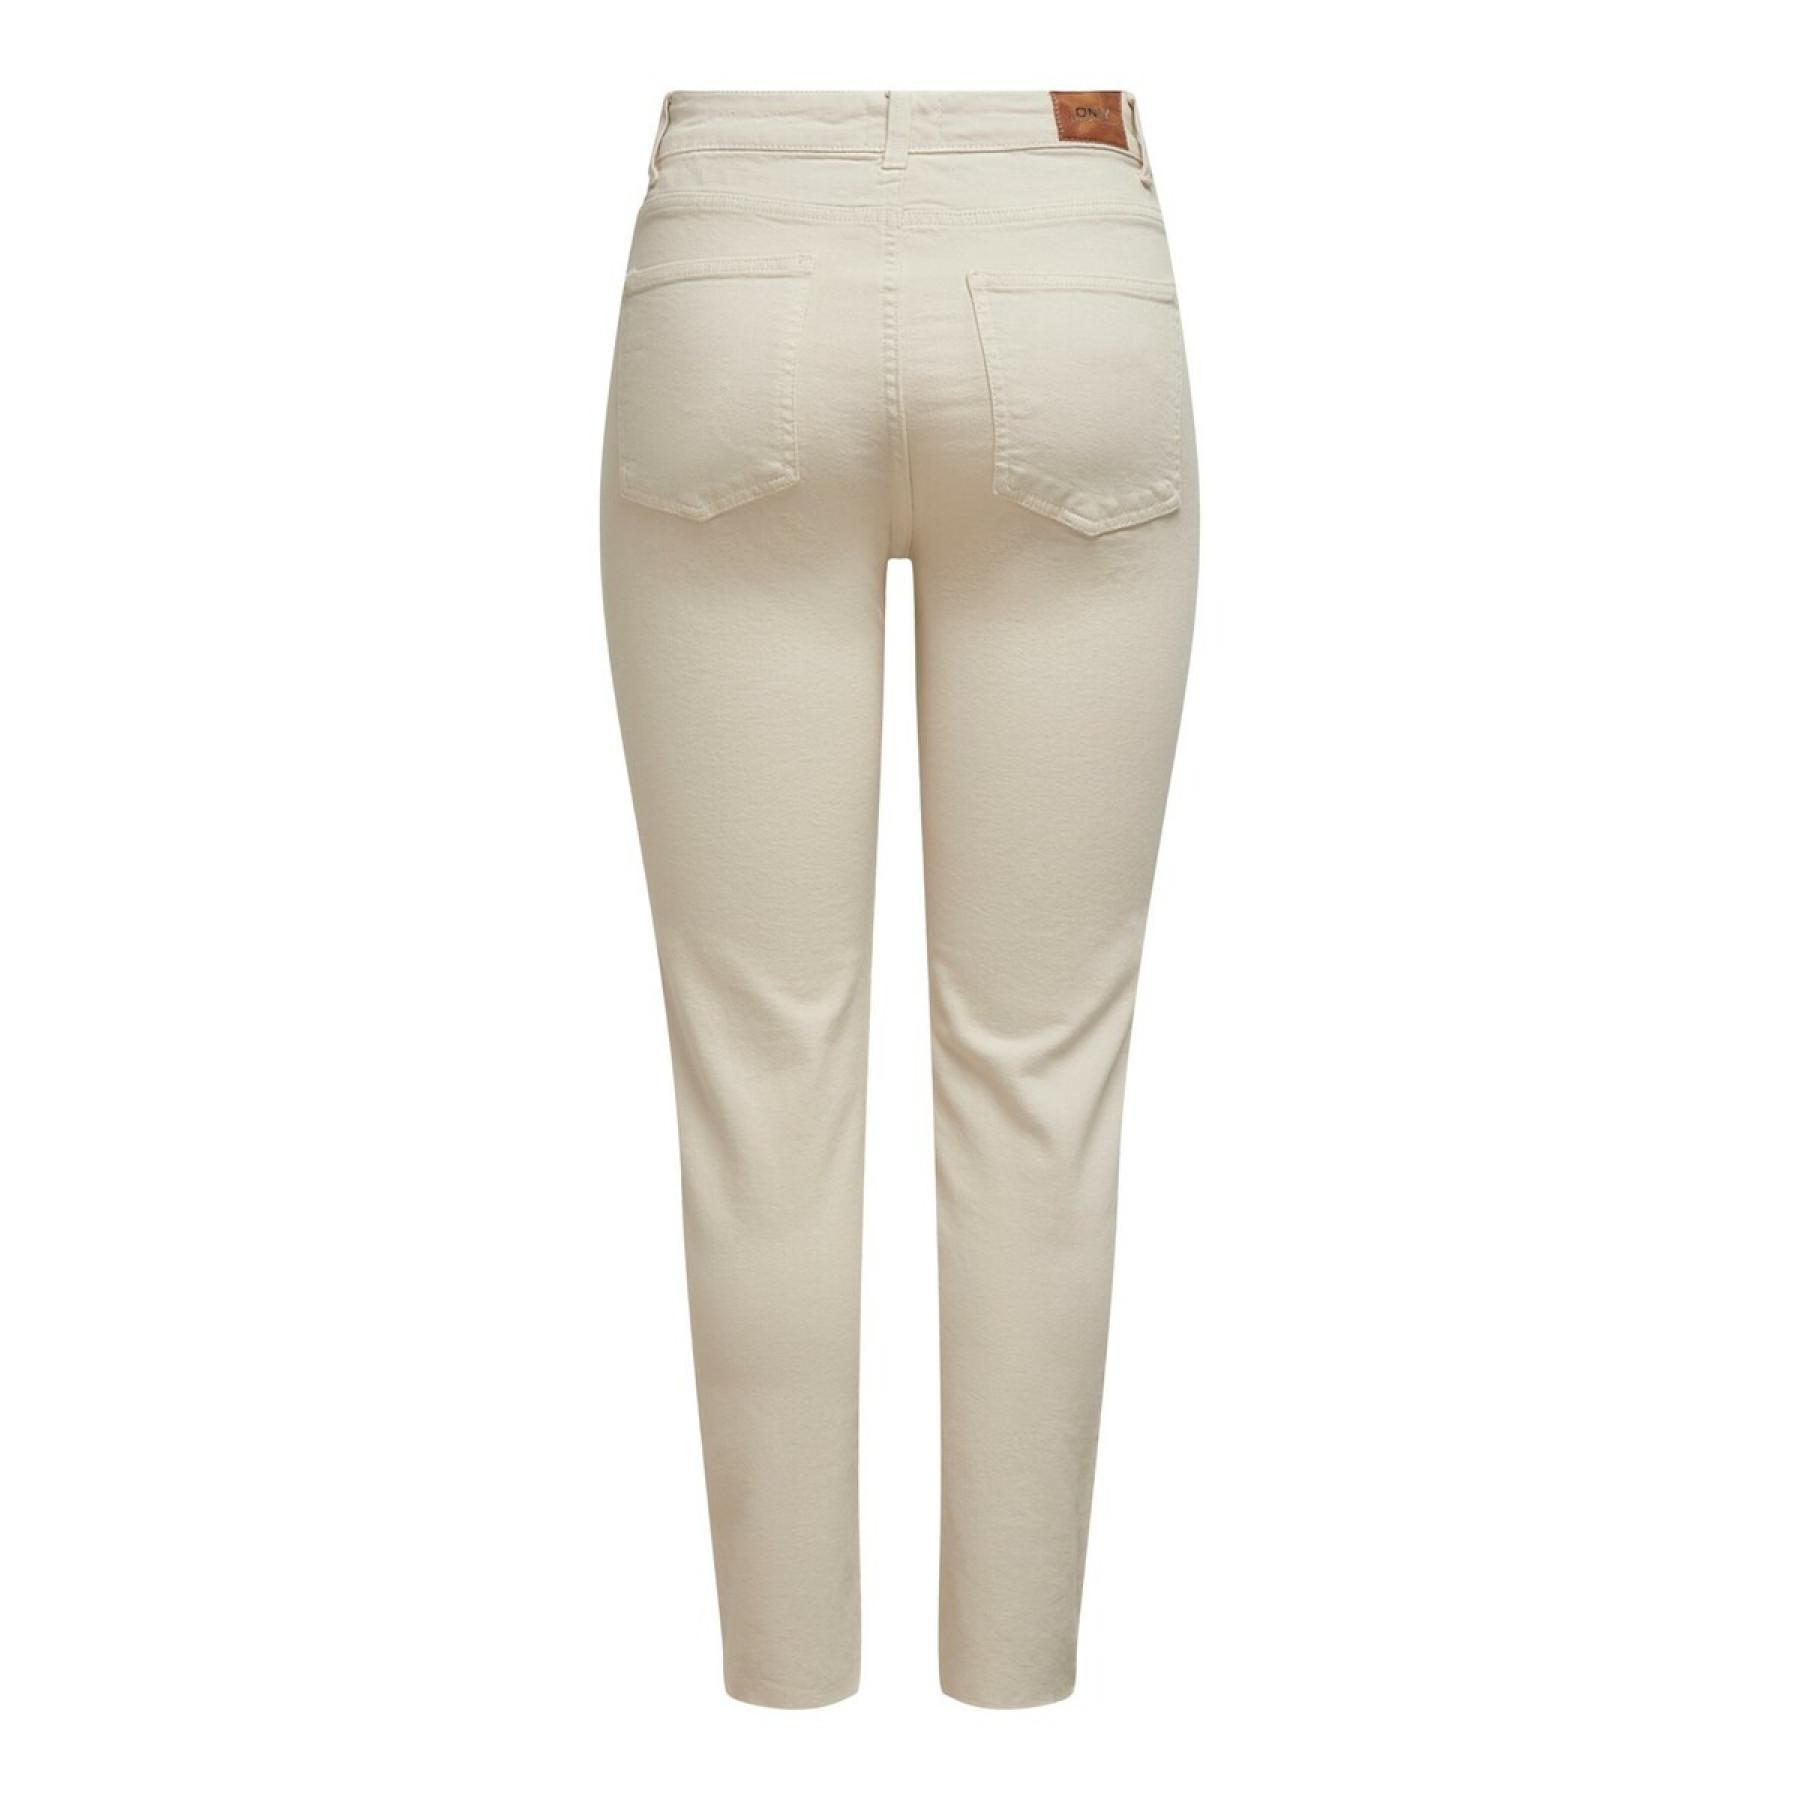 Women's trousers Only Emily life crpank